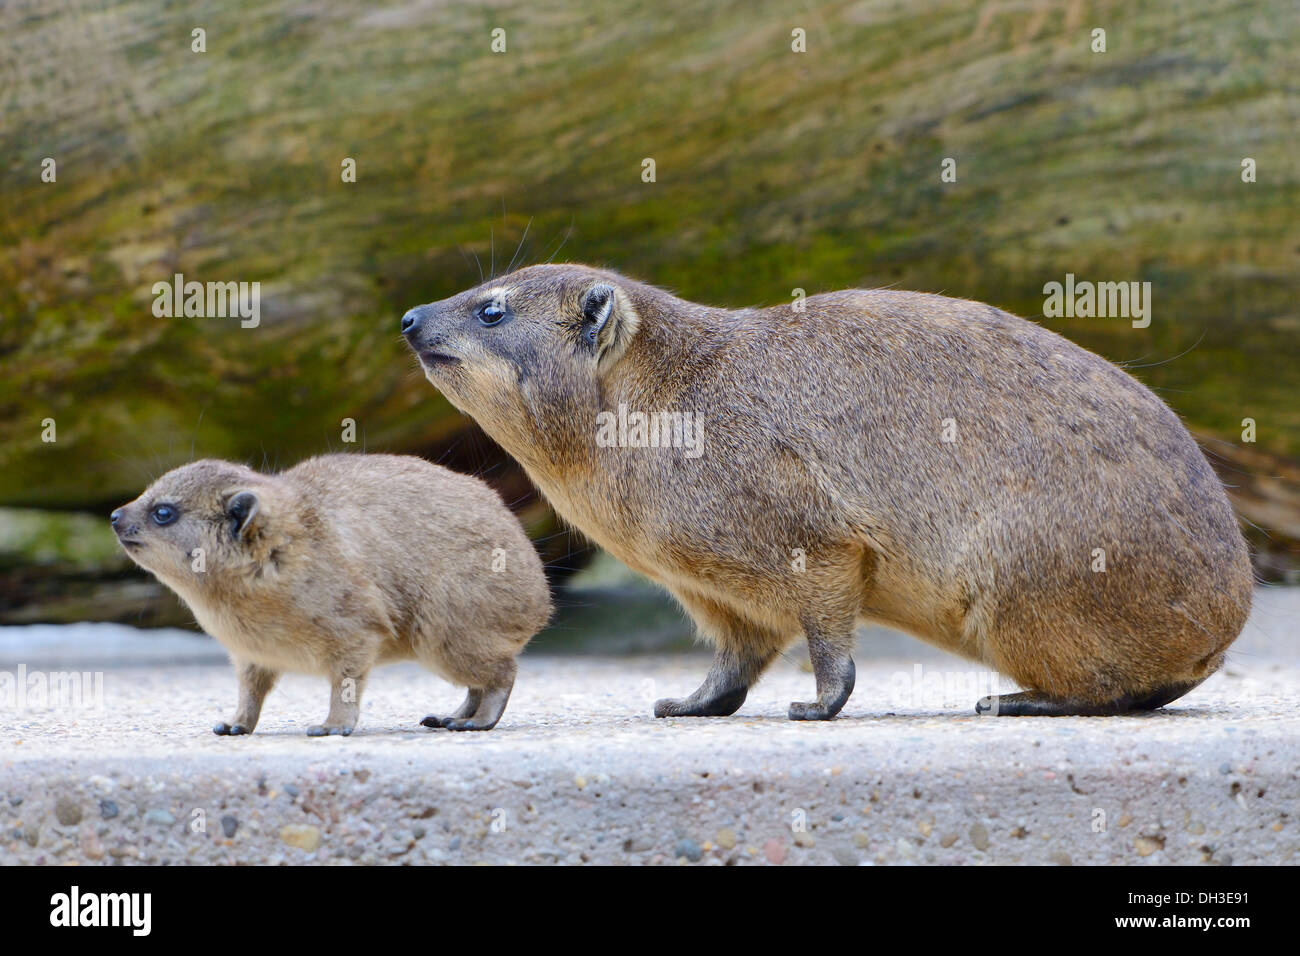 Rock Hyrax or Cape Hyrax (Procavia capensis) ith its young, Baden-Württemberg, Germany Stock Photo